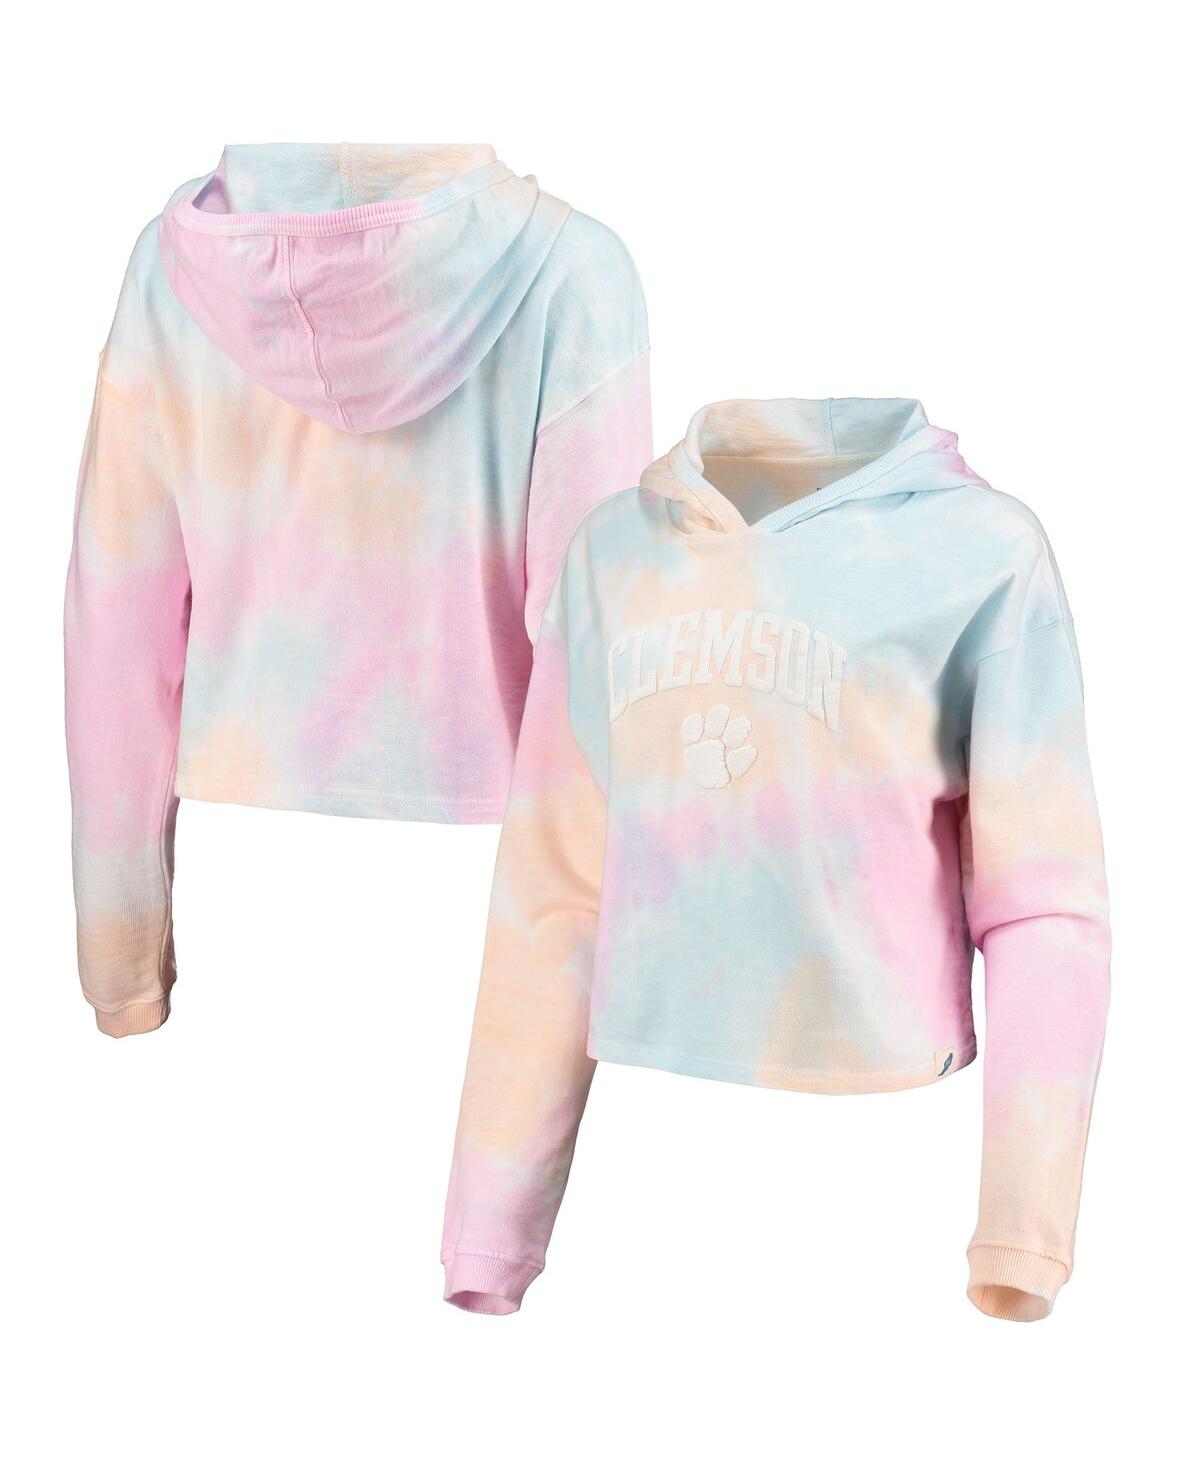 Women's League Collegiate Wear Pink, White Clemson Tigers Tie-Dye Cropped Pullover Hoodie - Pink, White